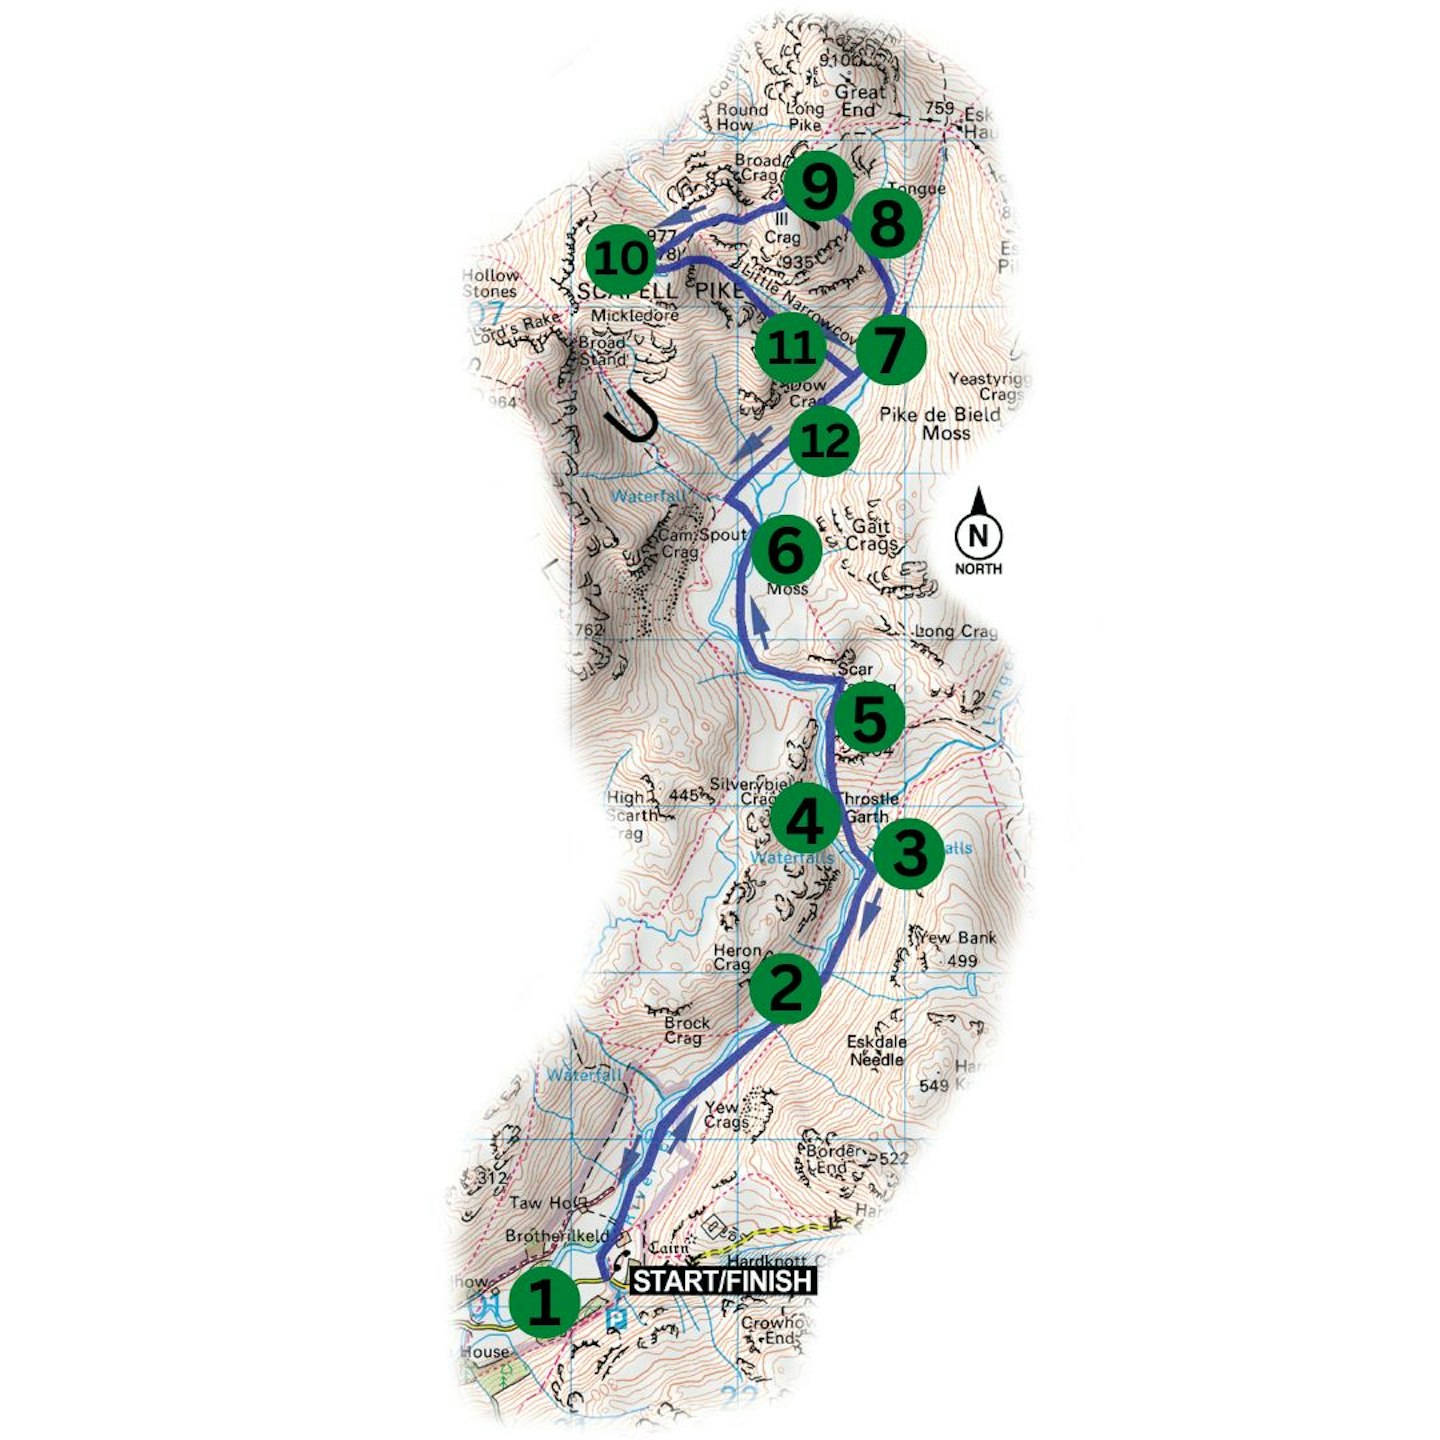 Scafell Cockly Pike Rdige route map